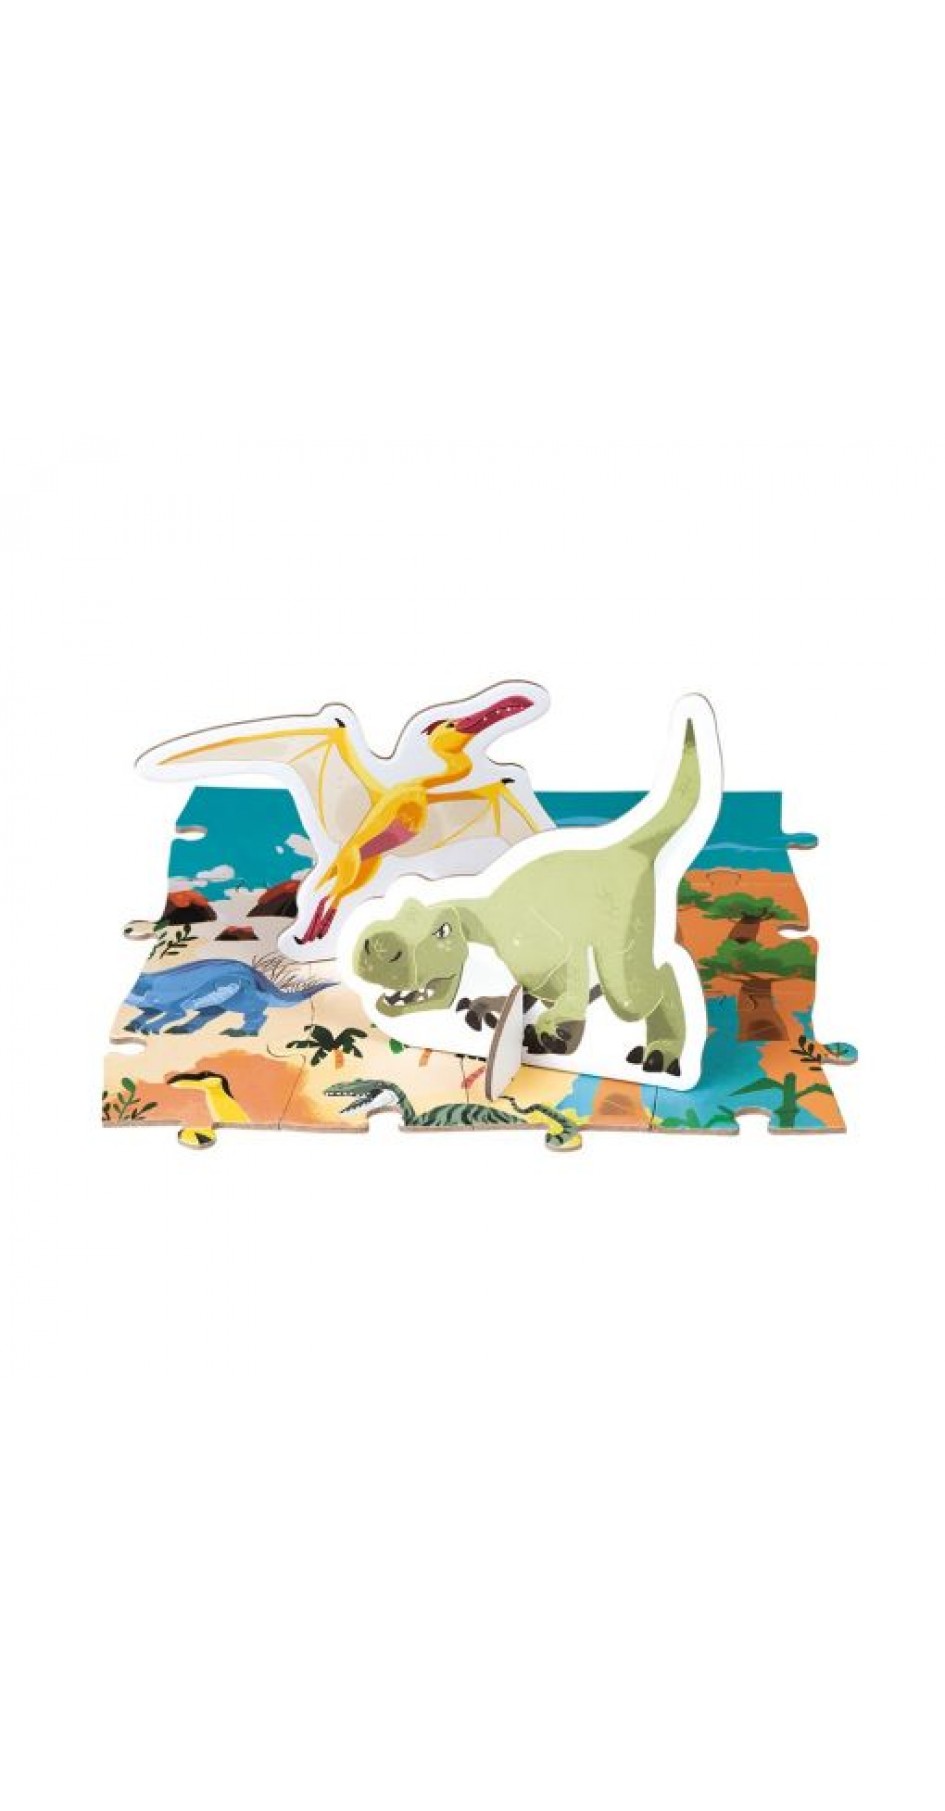 Educational Puzzle The Dinosaurs (200 pieces)